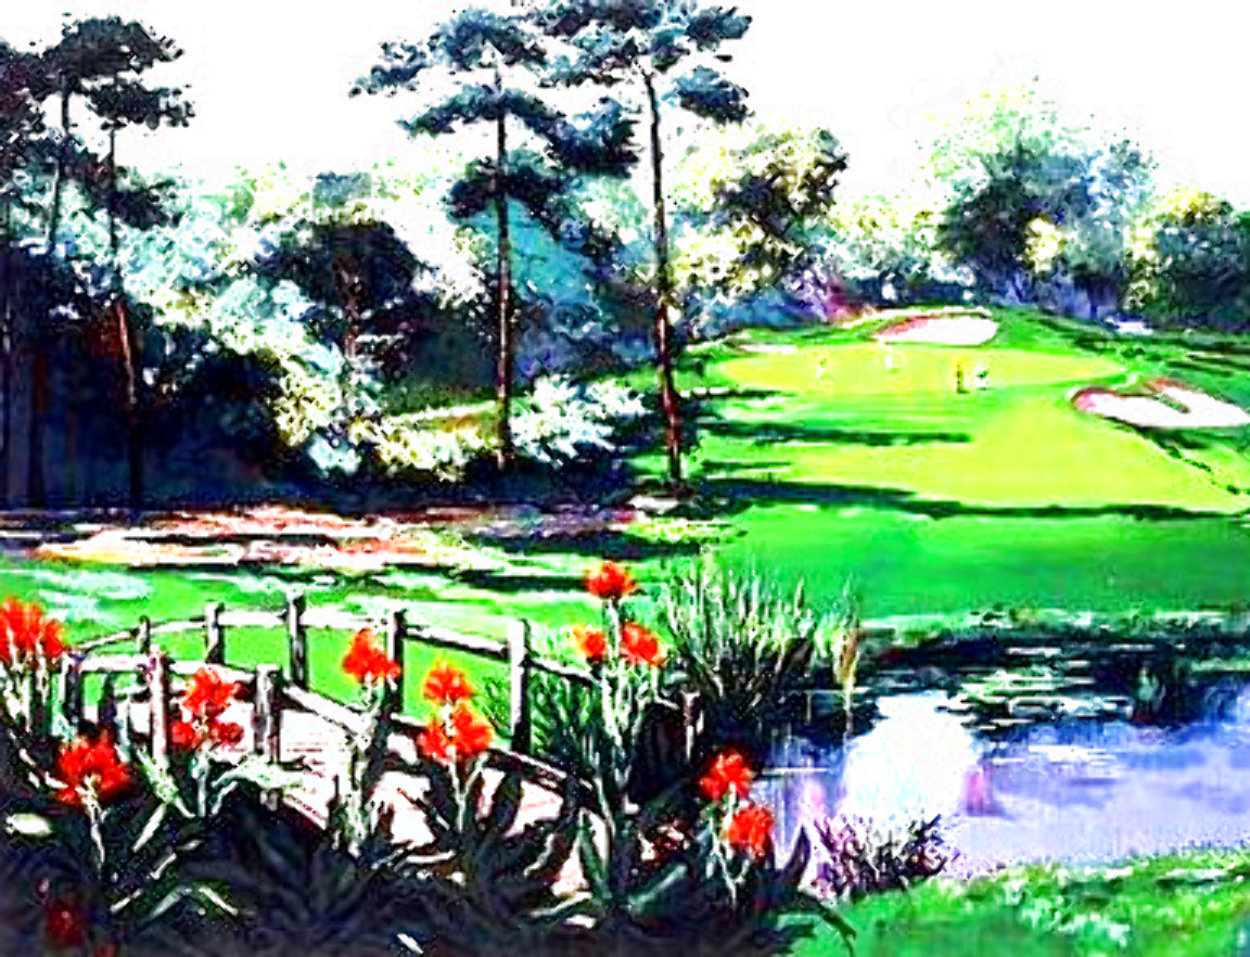 Golf Landscape 1990 Limited Edition Print by Mark King